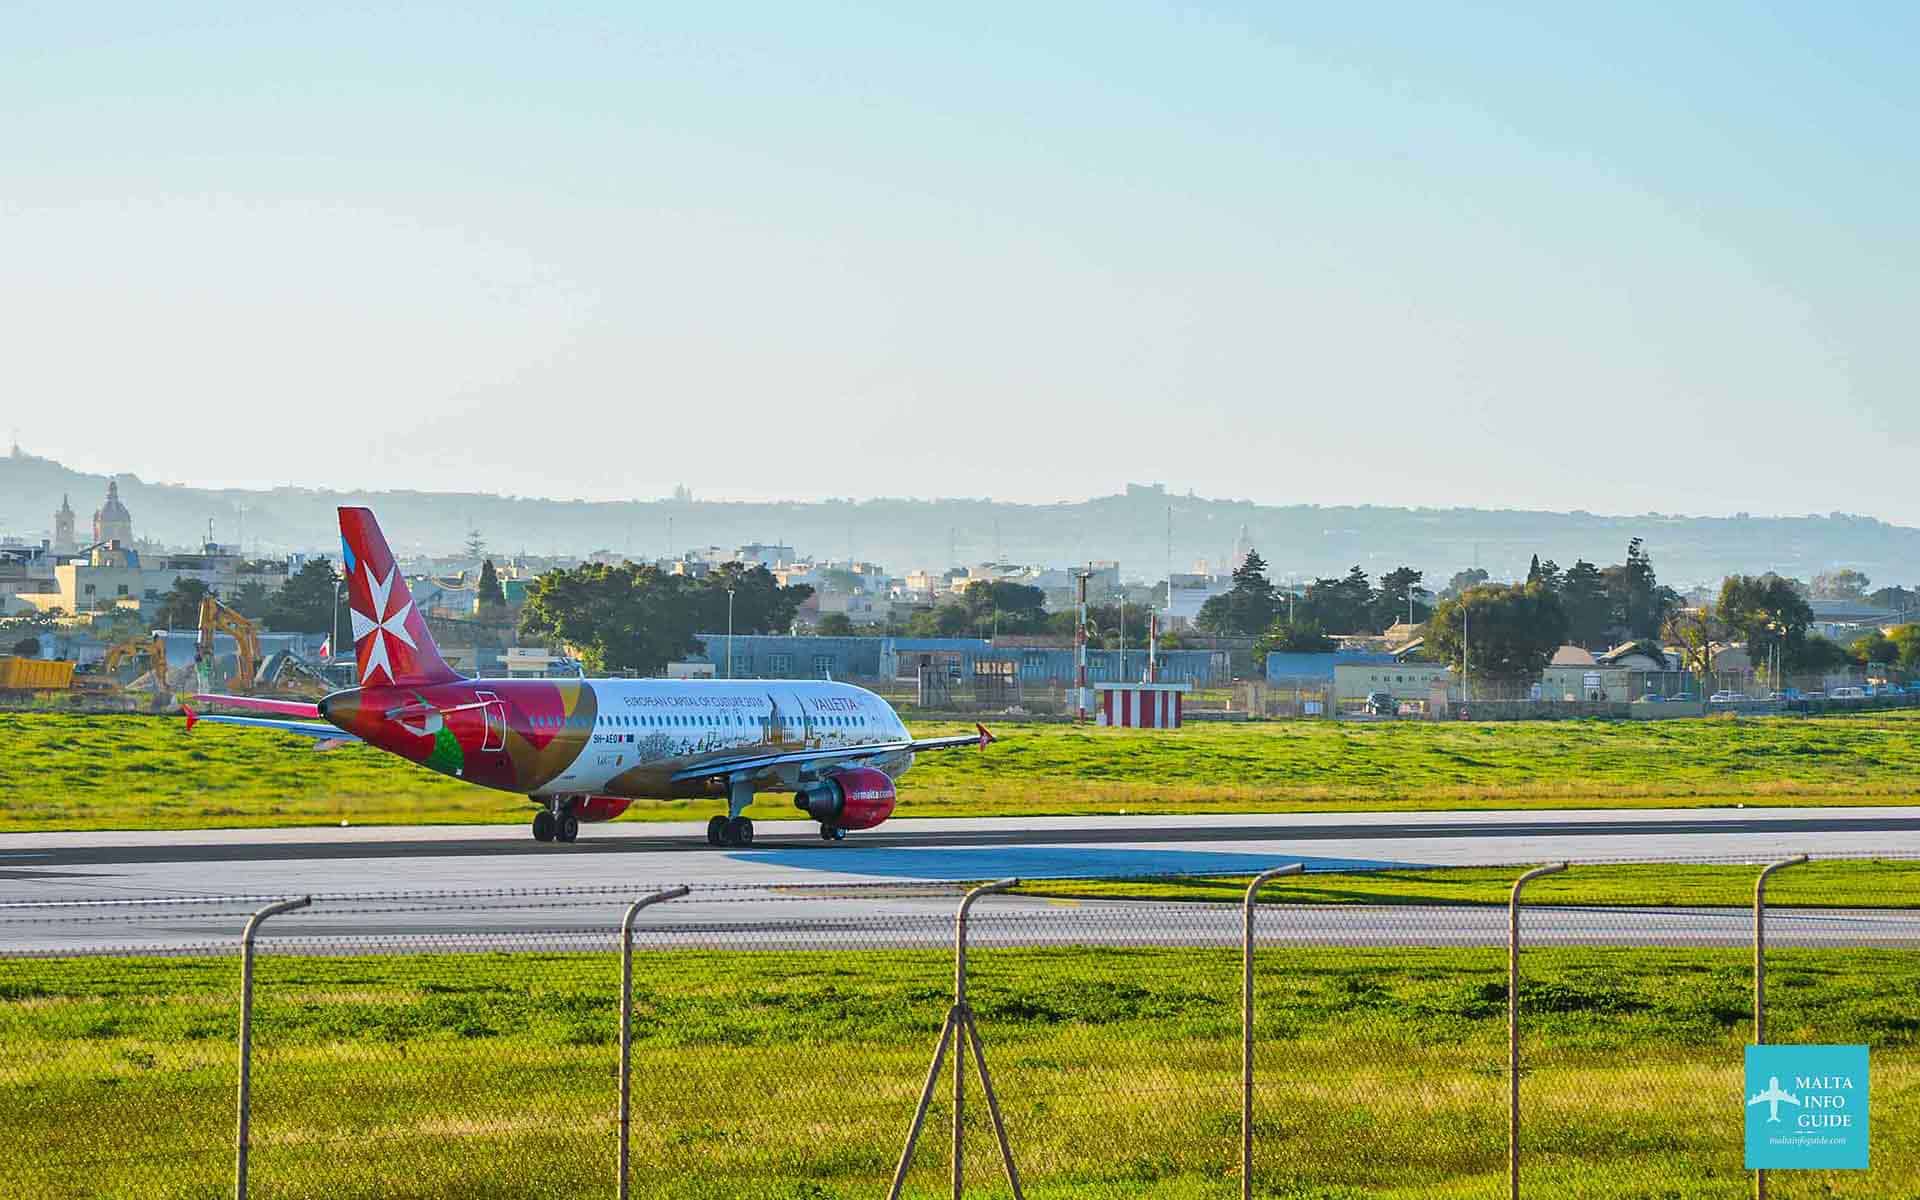 Air Malta getting ready to take off.